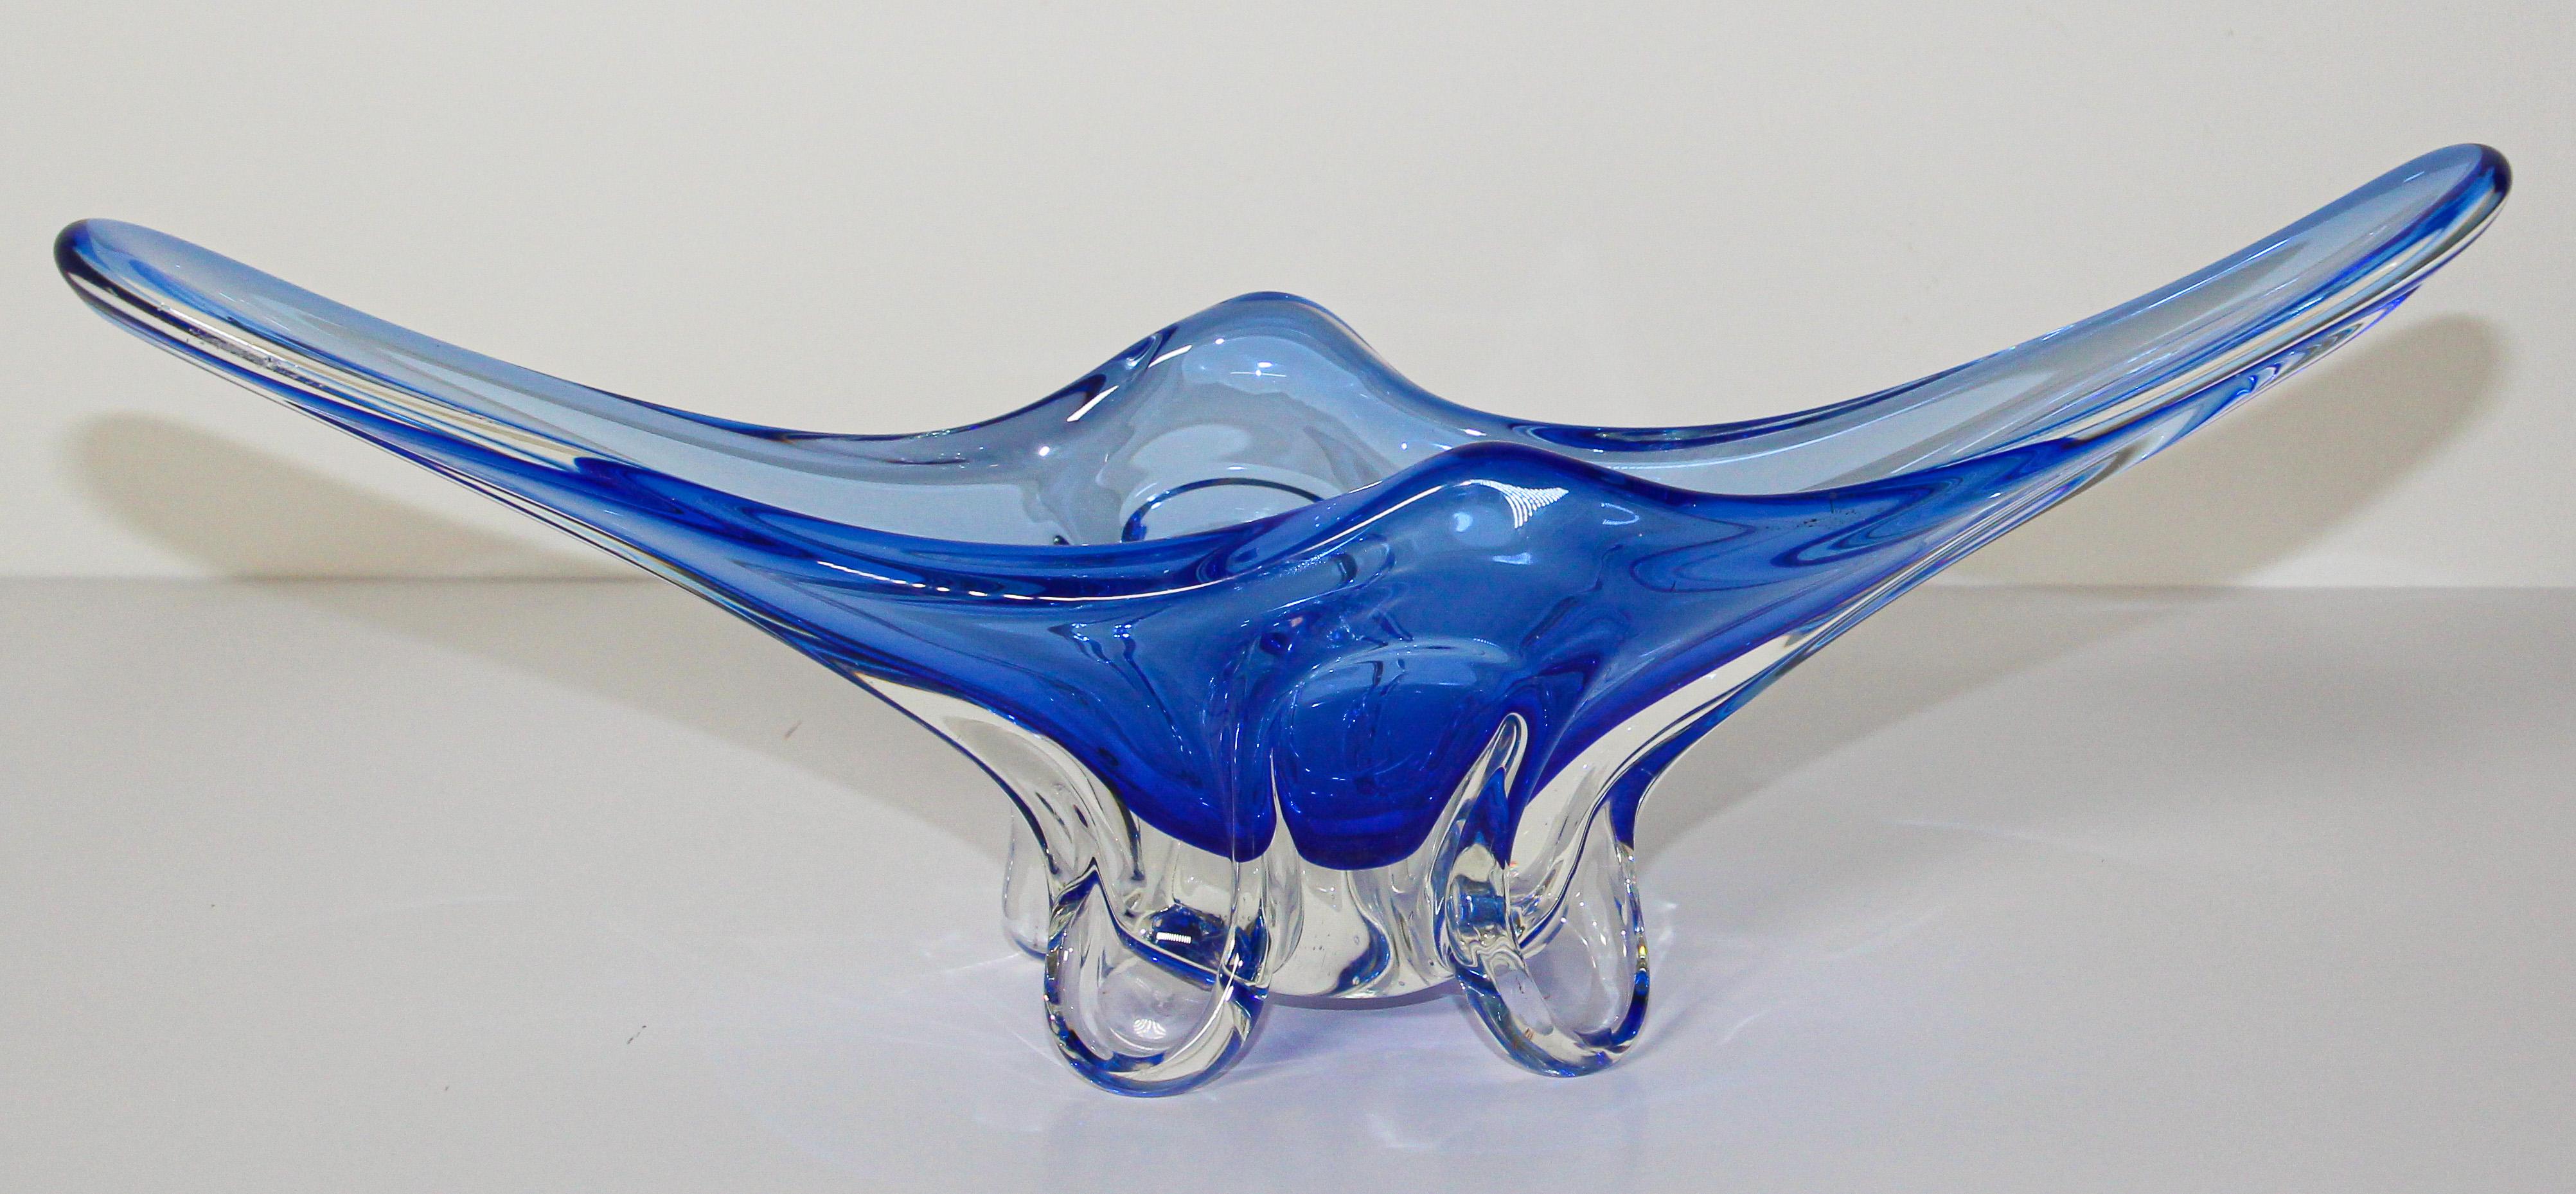 Large exquisite modern decorative hand blown Murano art glass bowl with a radiating stylized design in an amazing royal blue glass.
Beautiful Murano midcentury hand blown decorative bowl in a thick elongated shape handcrafted in Italy, circa